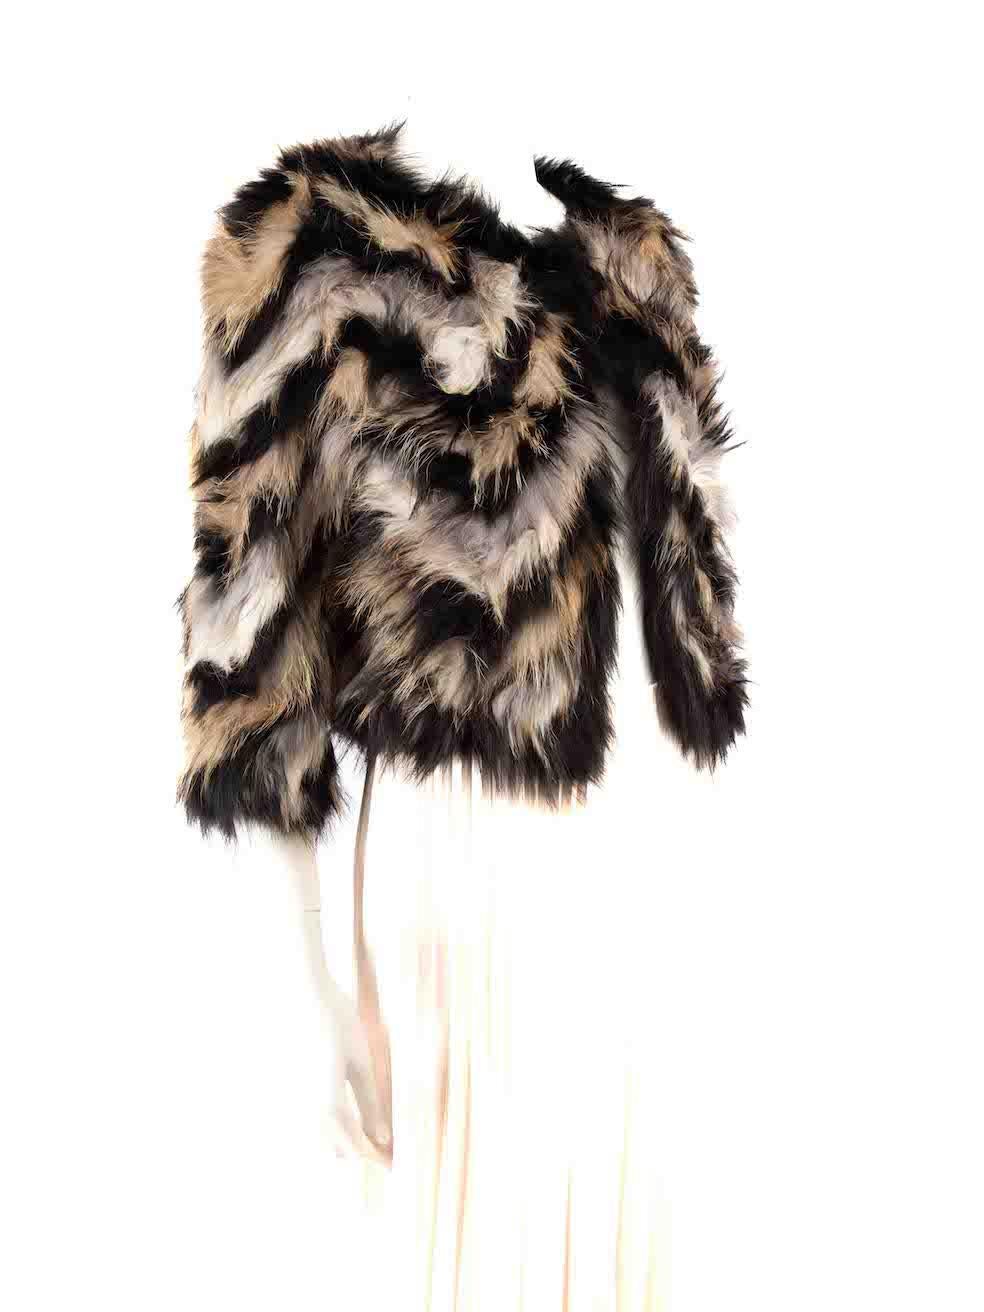 CONDITION is Very good. Hardly any visible wear to jacket is evident on this used bdba designer resale item.
 
 
 
 Details
 
 
 Multicolour- black, white, brown, grey
 
 Fur
 
 Jacket
 
 Cropped fit
 
 Long sleeves
 
 Hook fastening
 
 
 
 
 
